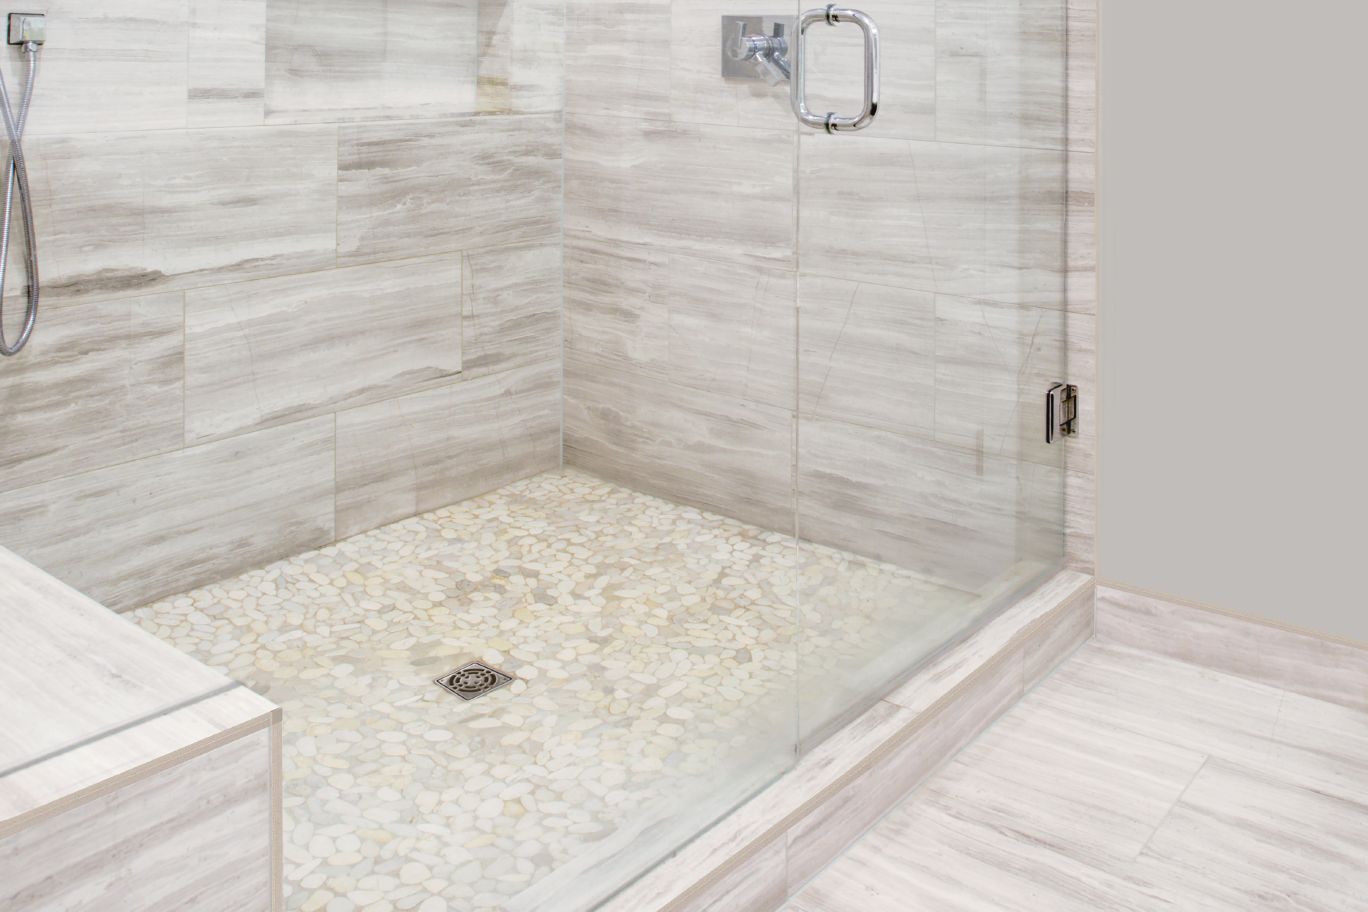 How to Build a Shower Base for Walk in Shower